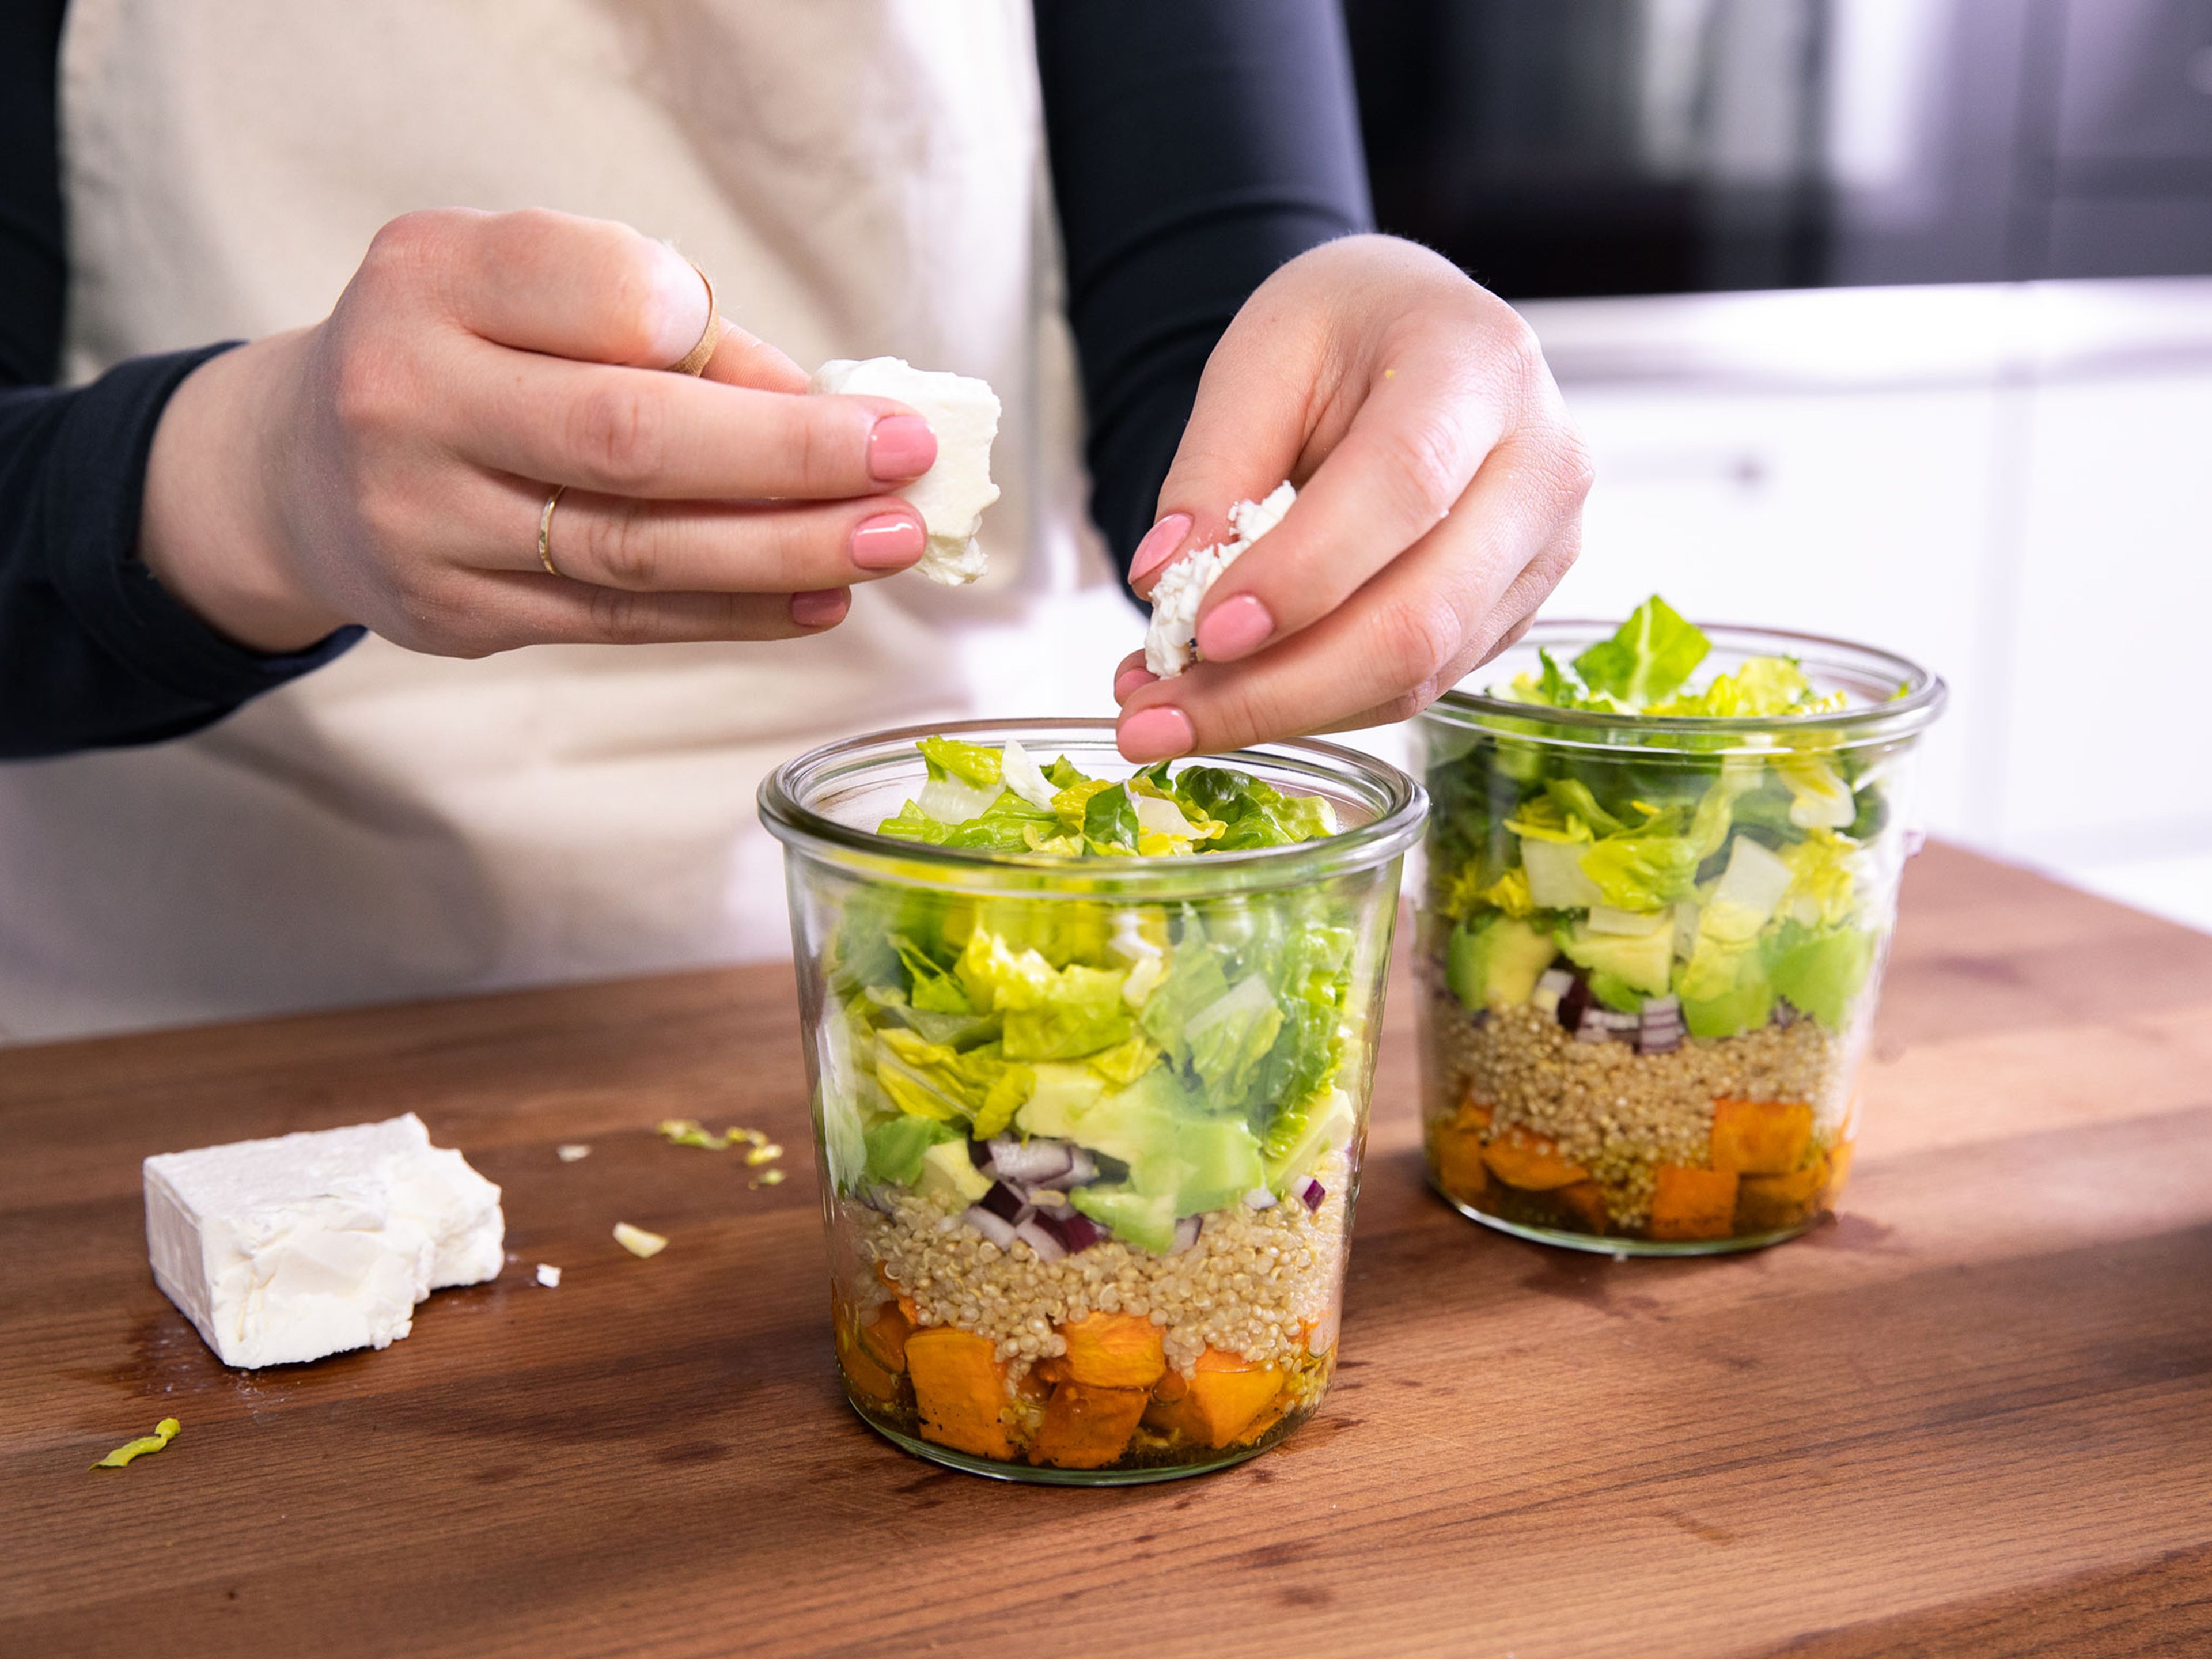 Start layering the salad with the dressing first and divide it equally to jars. Top with sweet potato, quinoa, red onion, avocado, and romaine lettuce. Crumble feta cheese with your hands and add on top, then finish with toasted sunflower seeds. Enjoy right away or store in the fridge for 1-2 days.